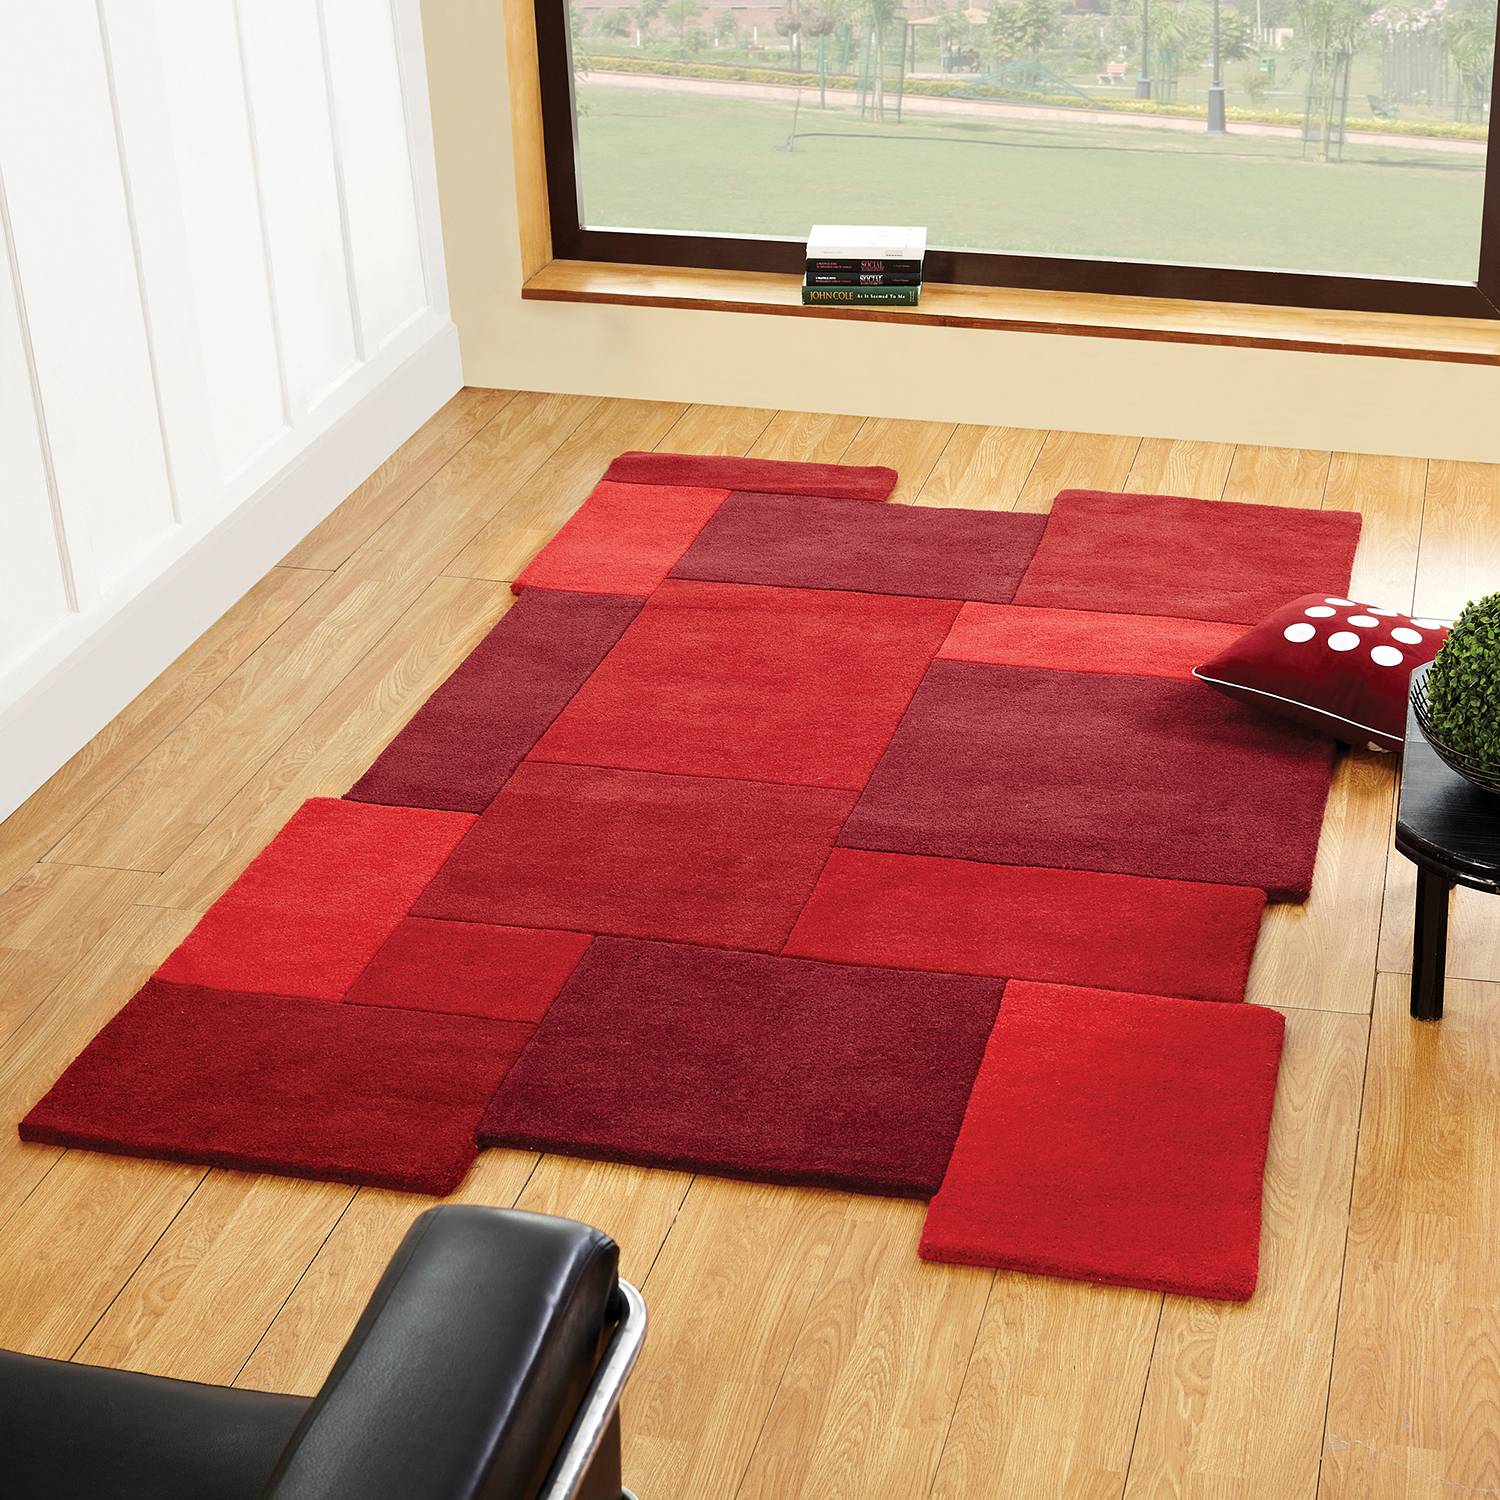 Image of Tapis en laine Collage 000000001000229977